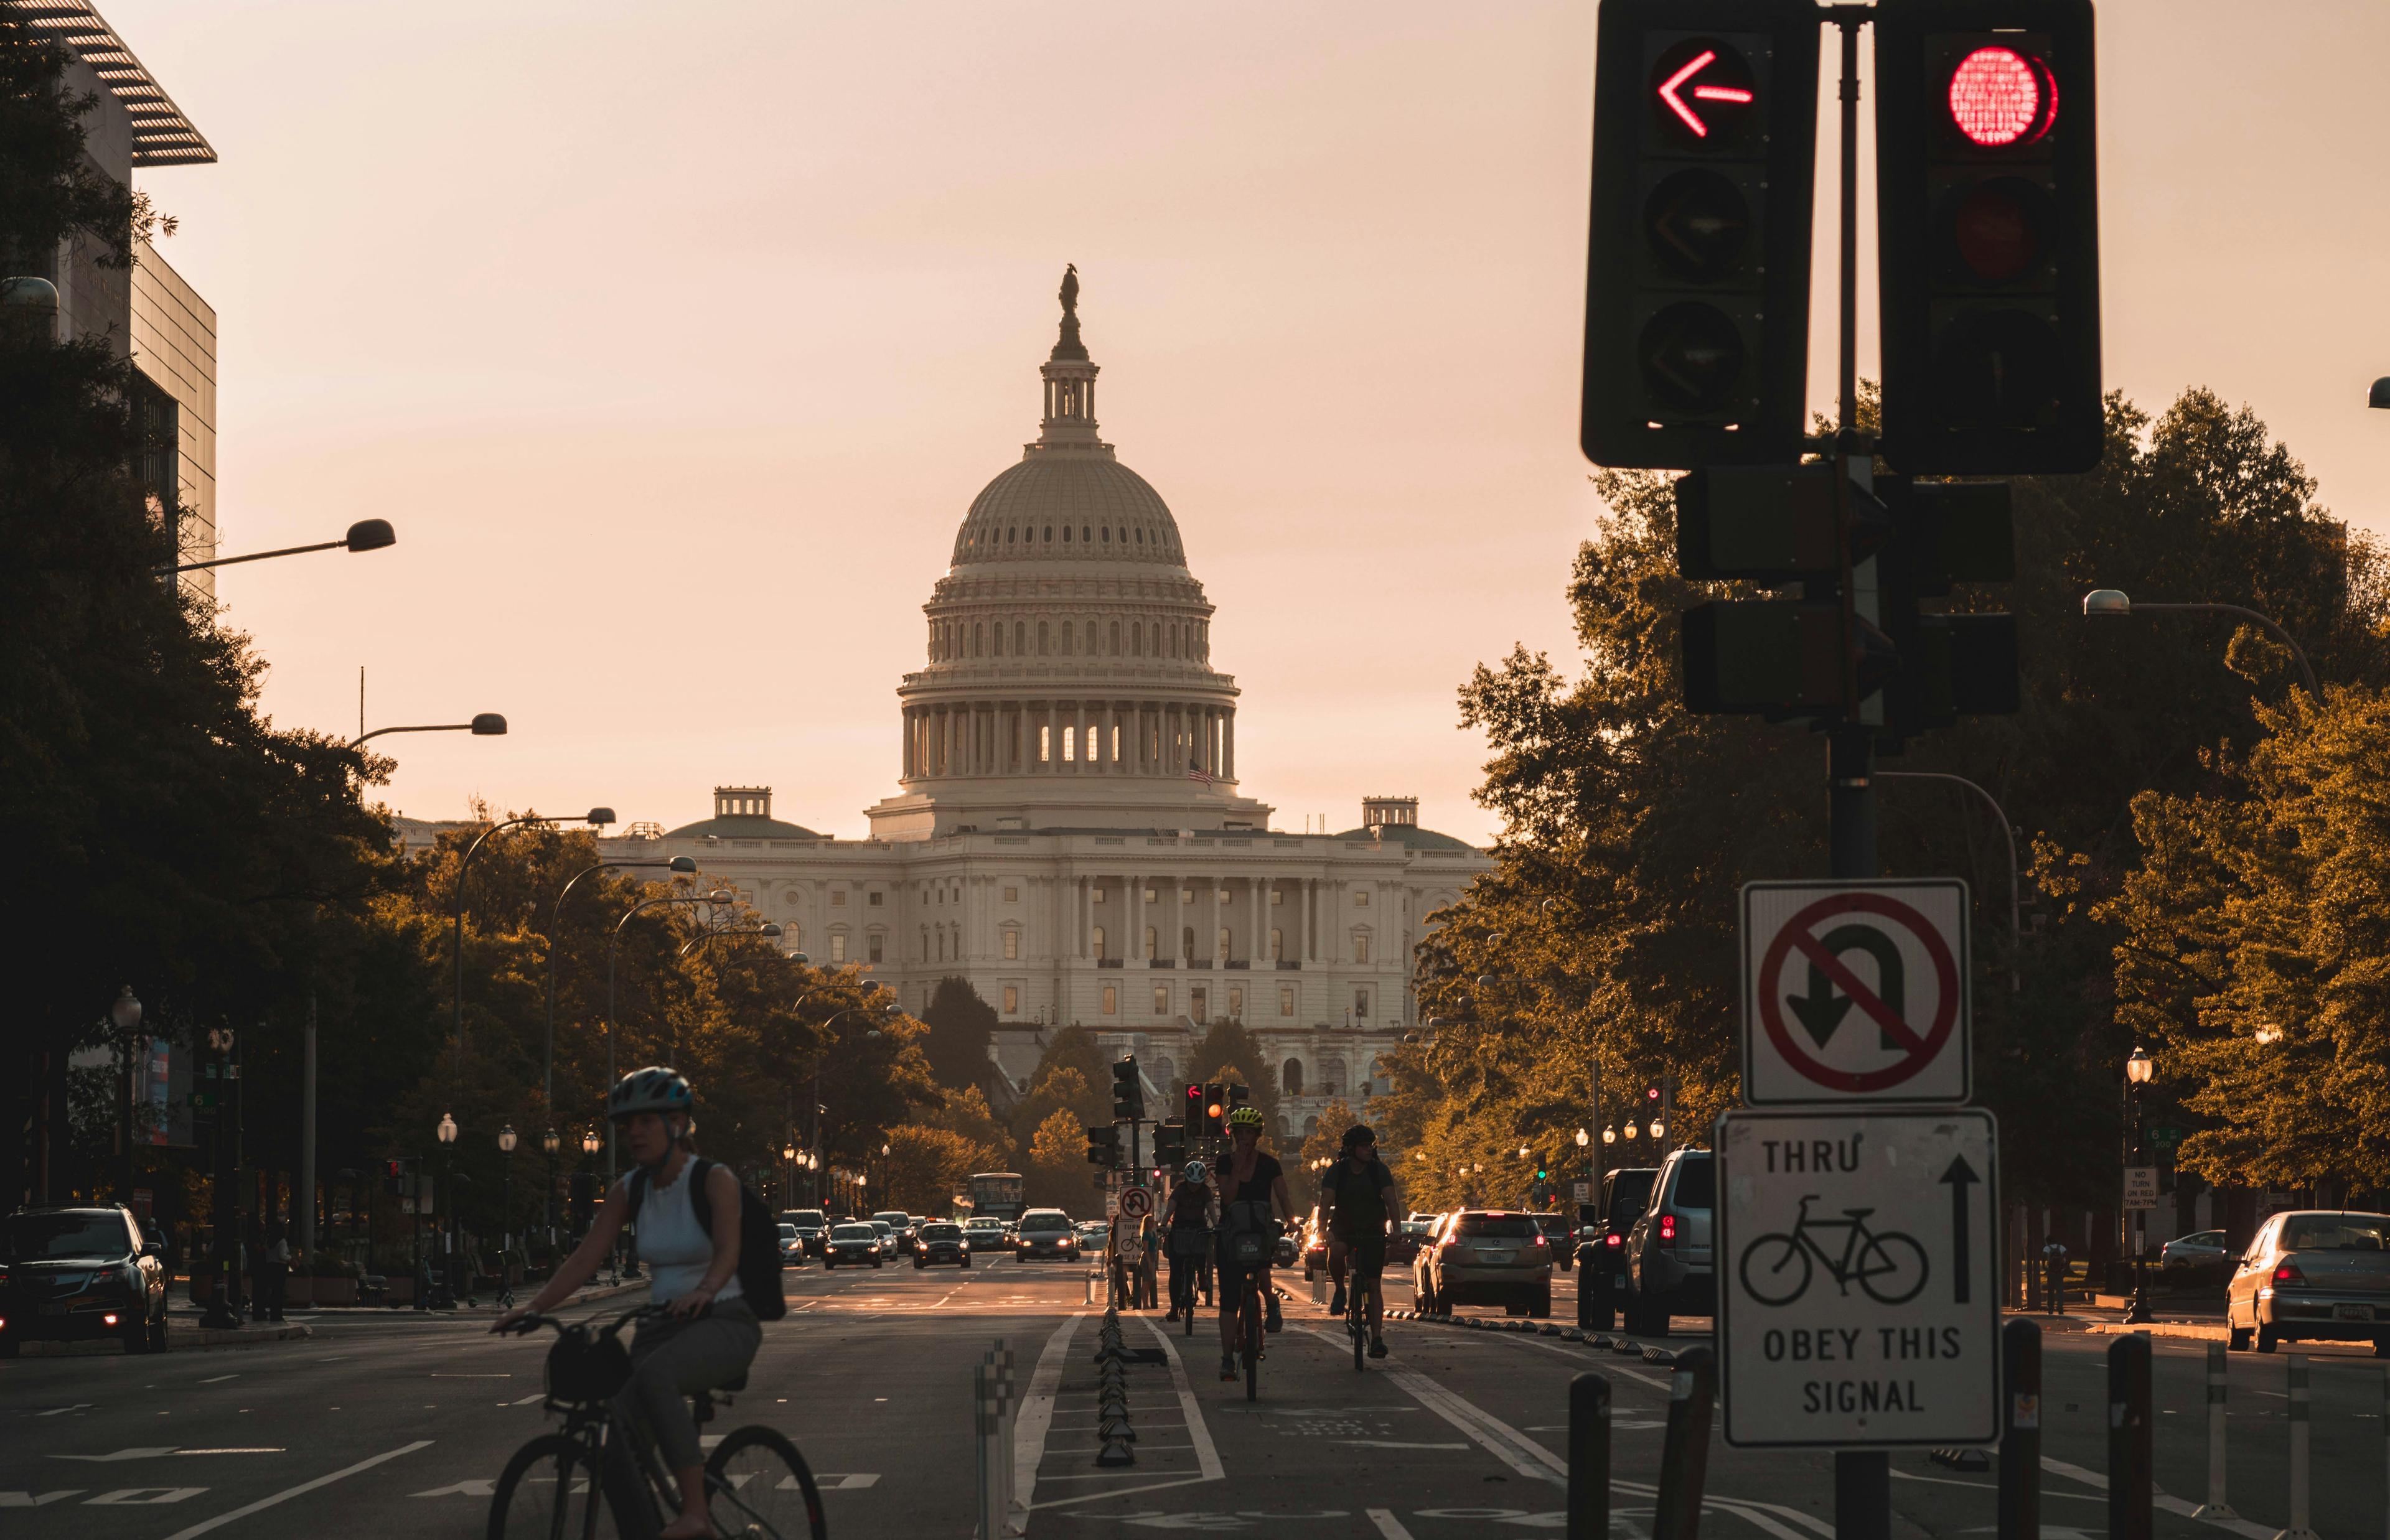 Federal government building and busy streets at sunset